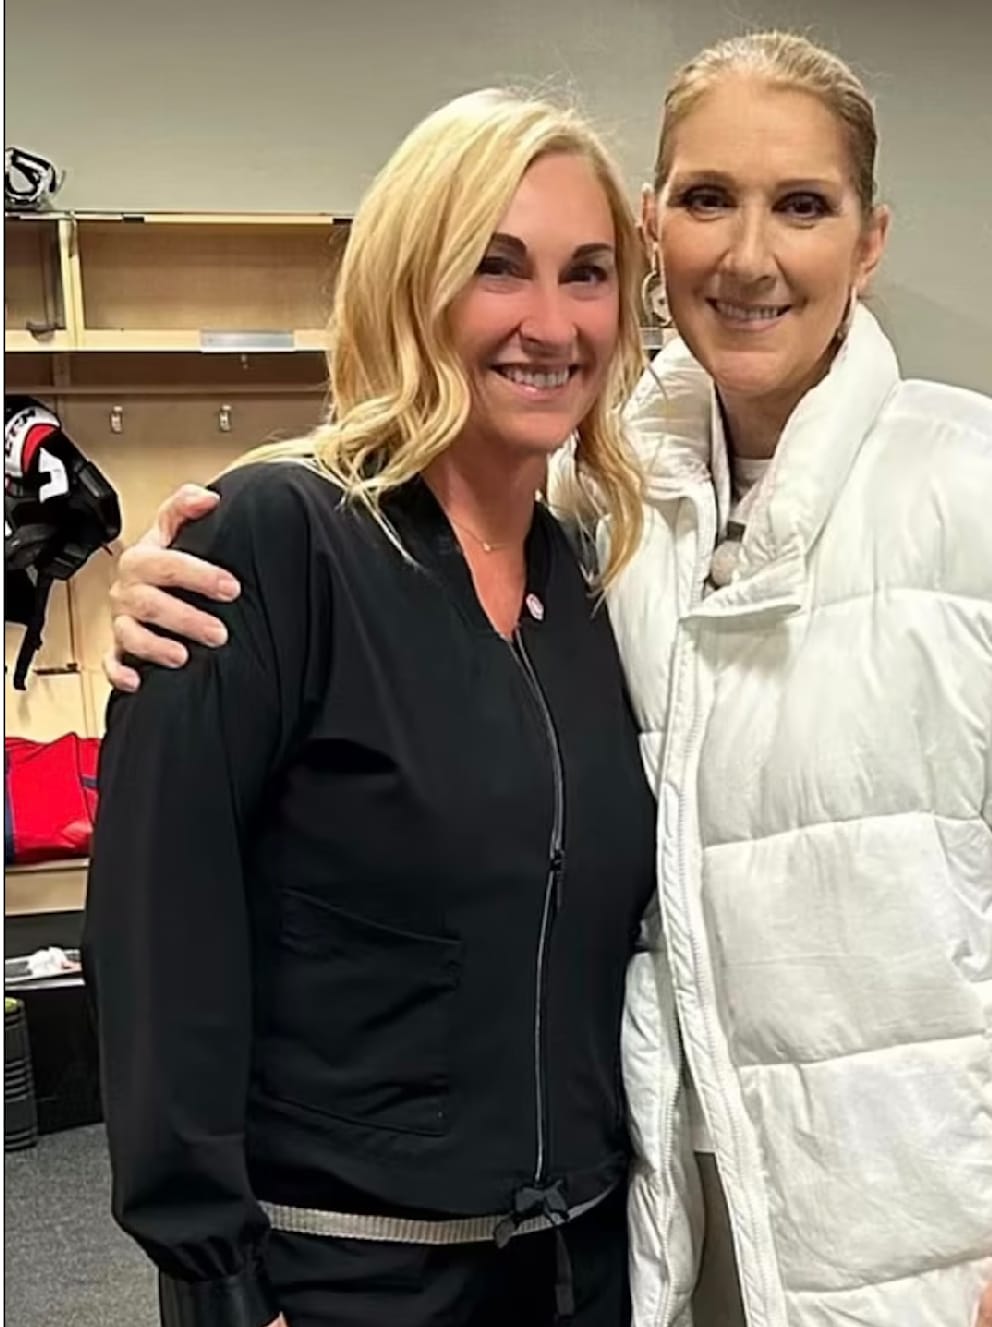 Céline Dion (r.) was in a good mood at an ice hockey game in November